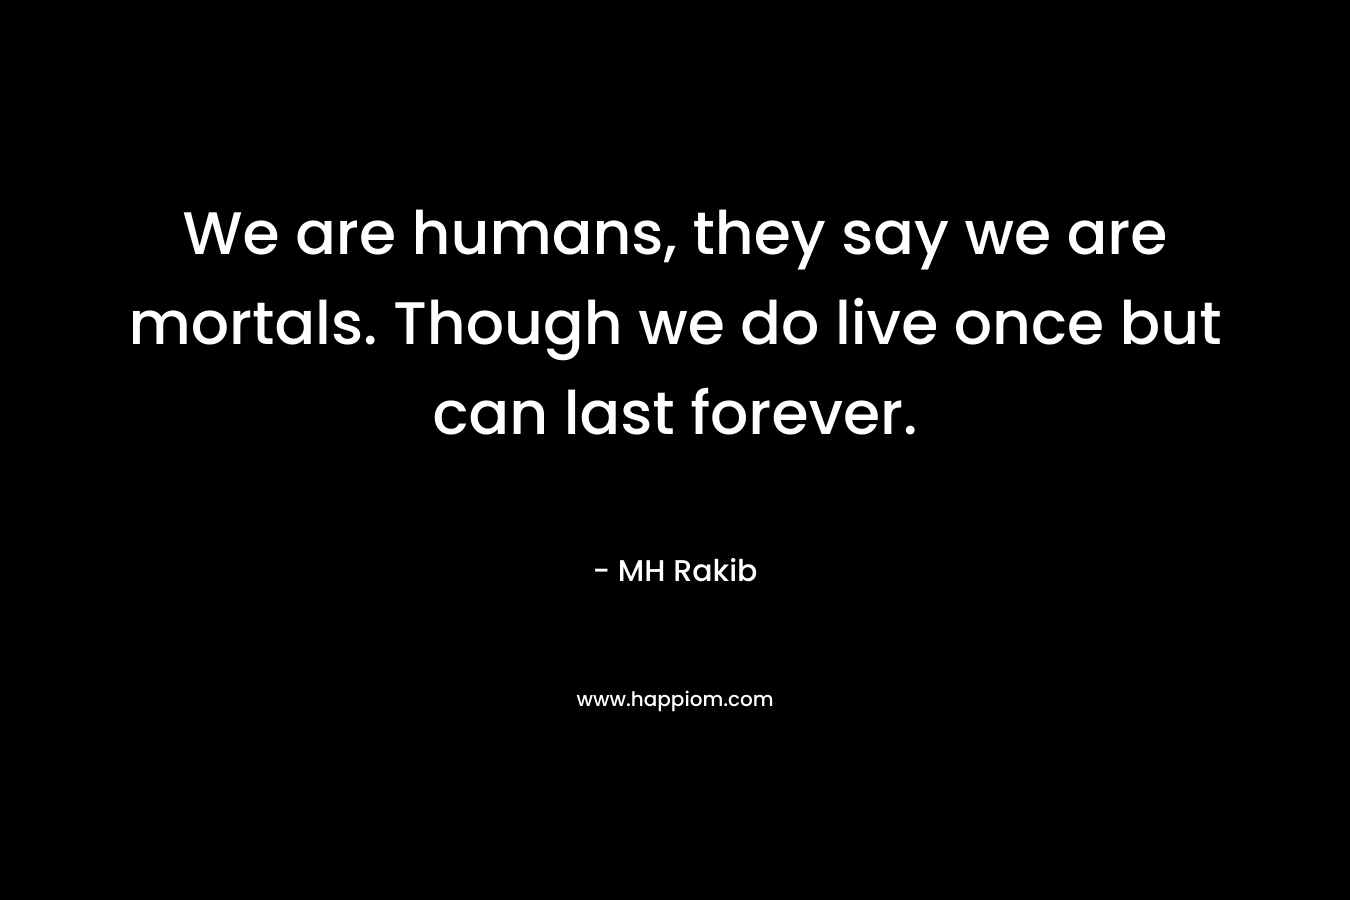 We are humans, they say we are mortals. Though we do live once but can last forever. – MH Rakib